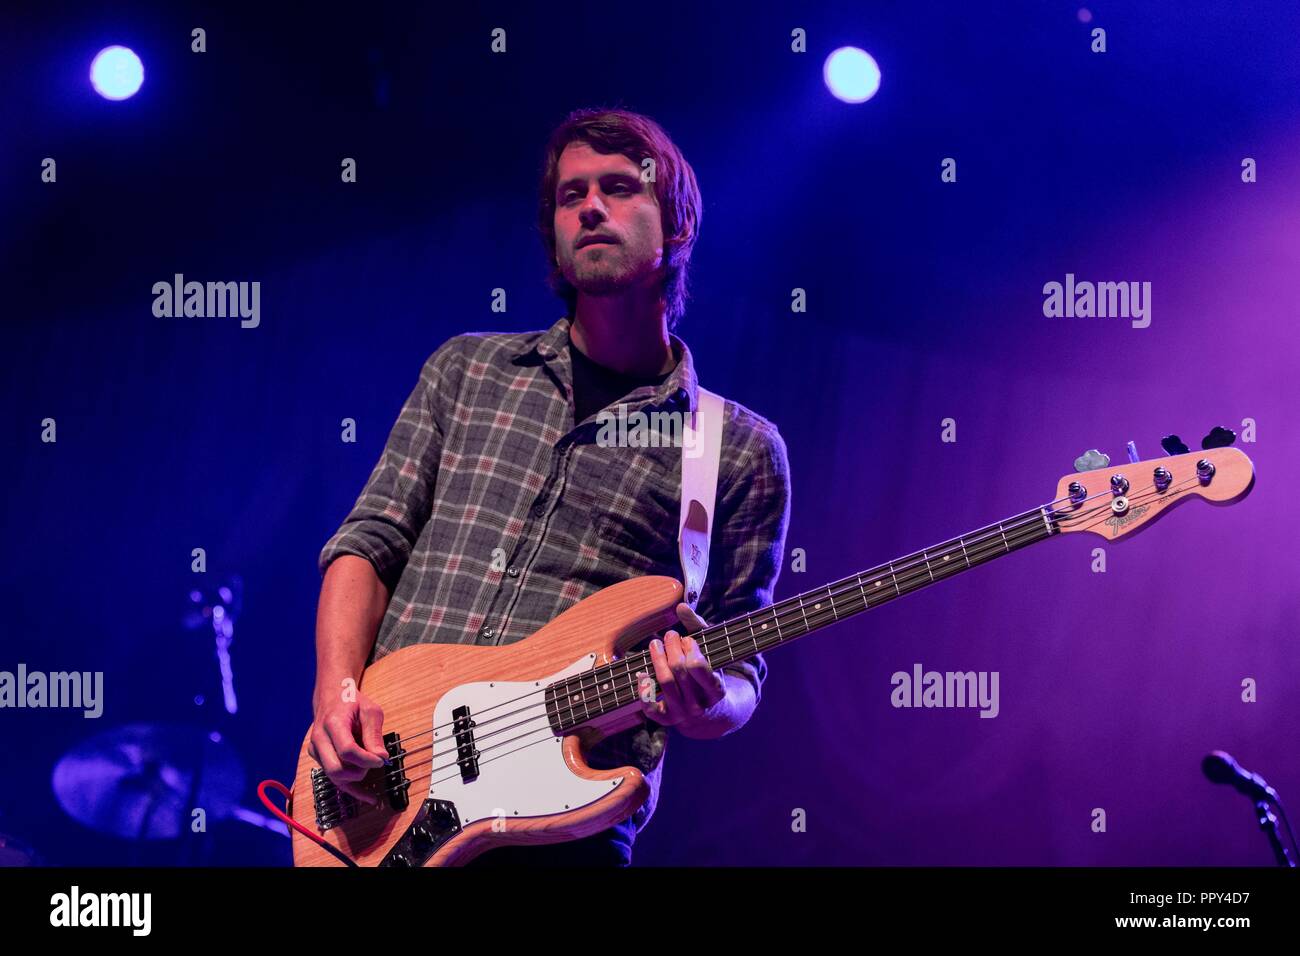 Madison, Wisconsin, USA. 27th Sep, 2018. ANDREW ROLFSEN of Campdogzz during  the Tearing at the Seams Tour at The Sylvee in Madison, Wisconsin Credit:  Daniel DeSlover/ZUMA Wire/Alamy Live News Stock Photo -